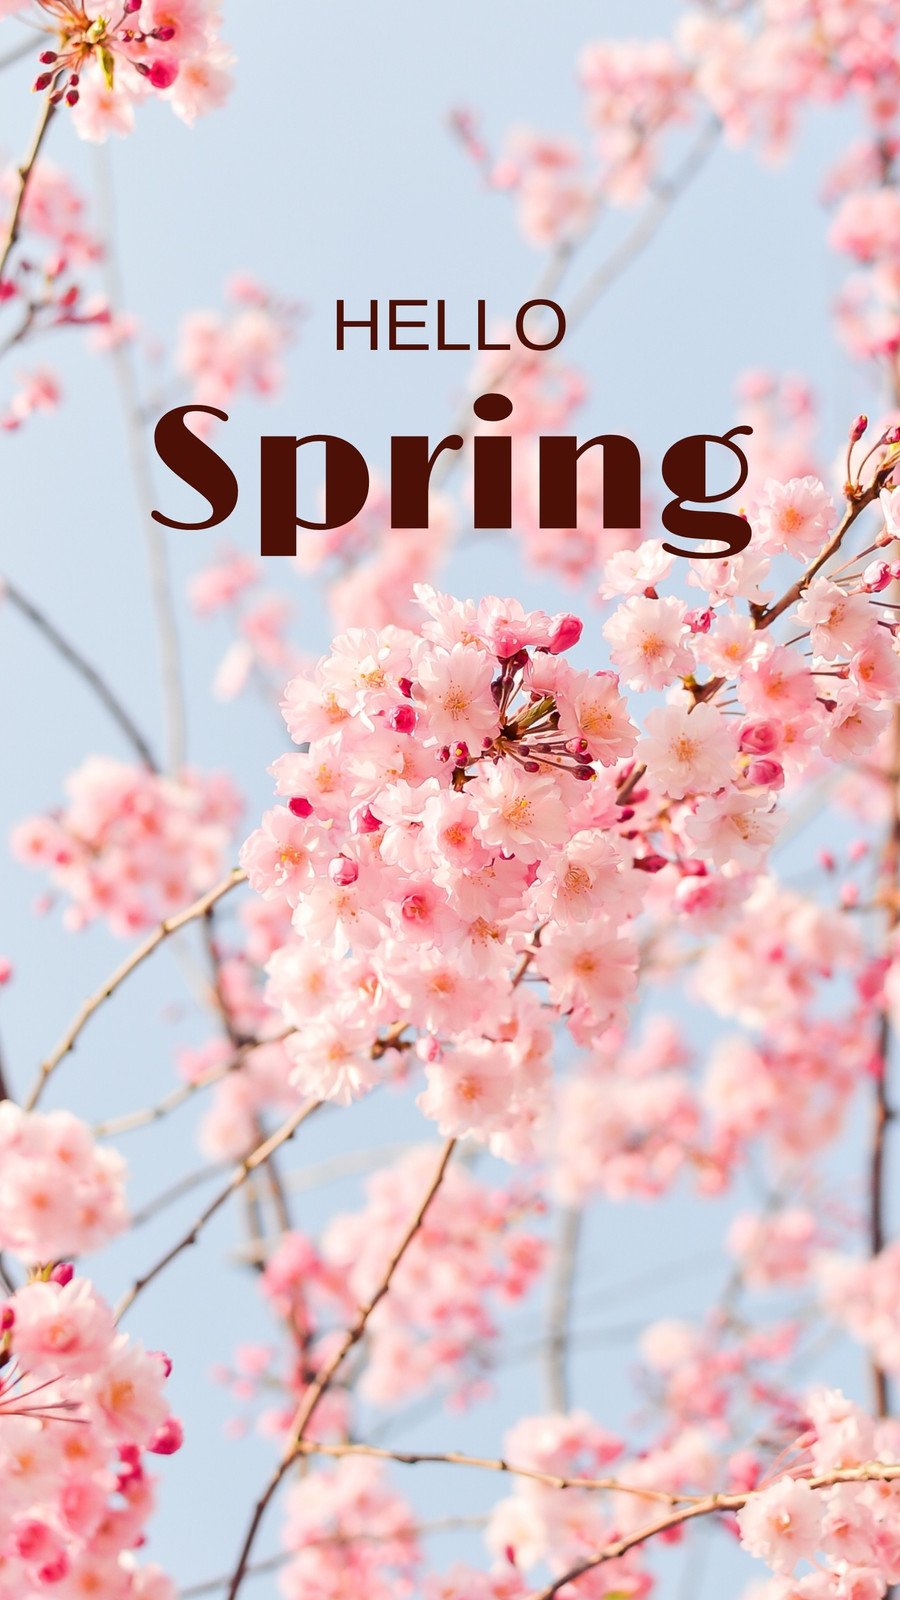 100+ Spring wallpaper cute For your phone and desktop